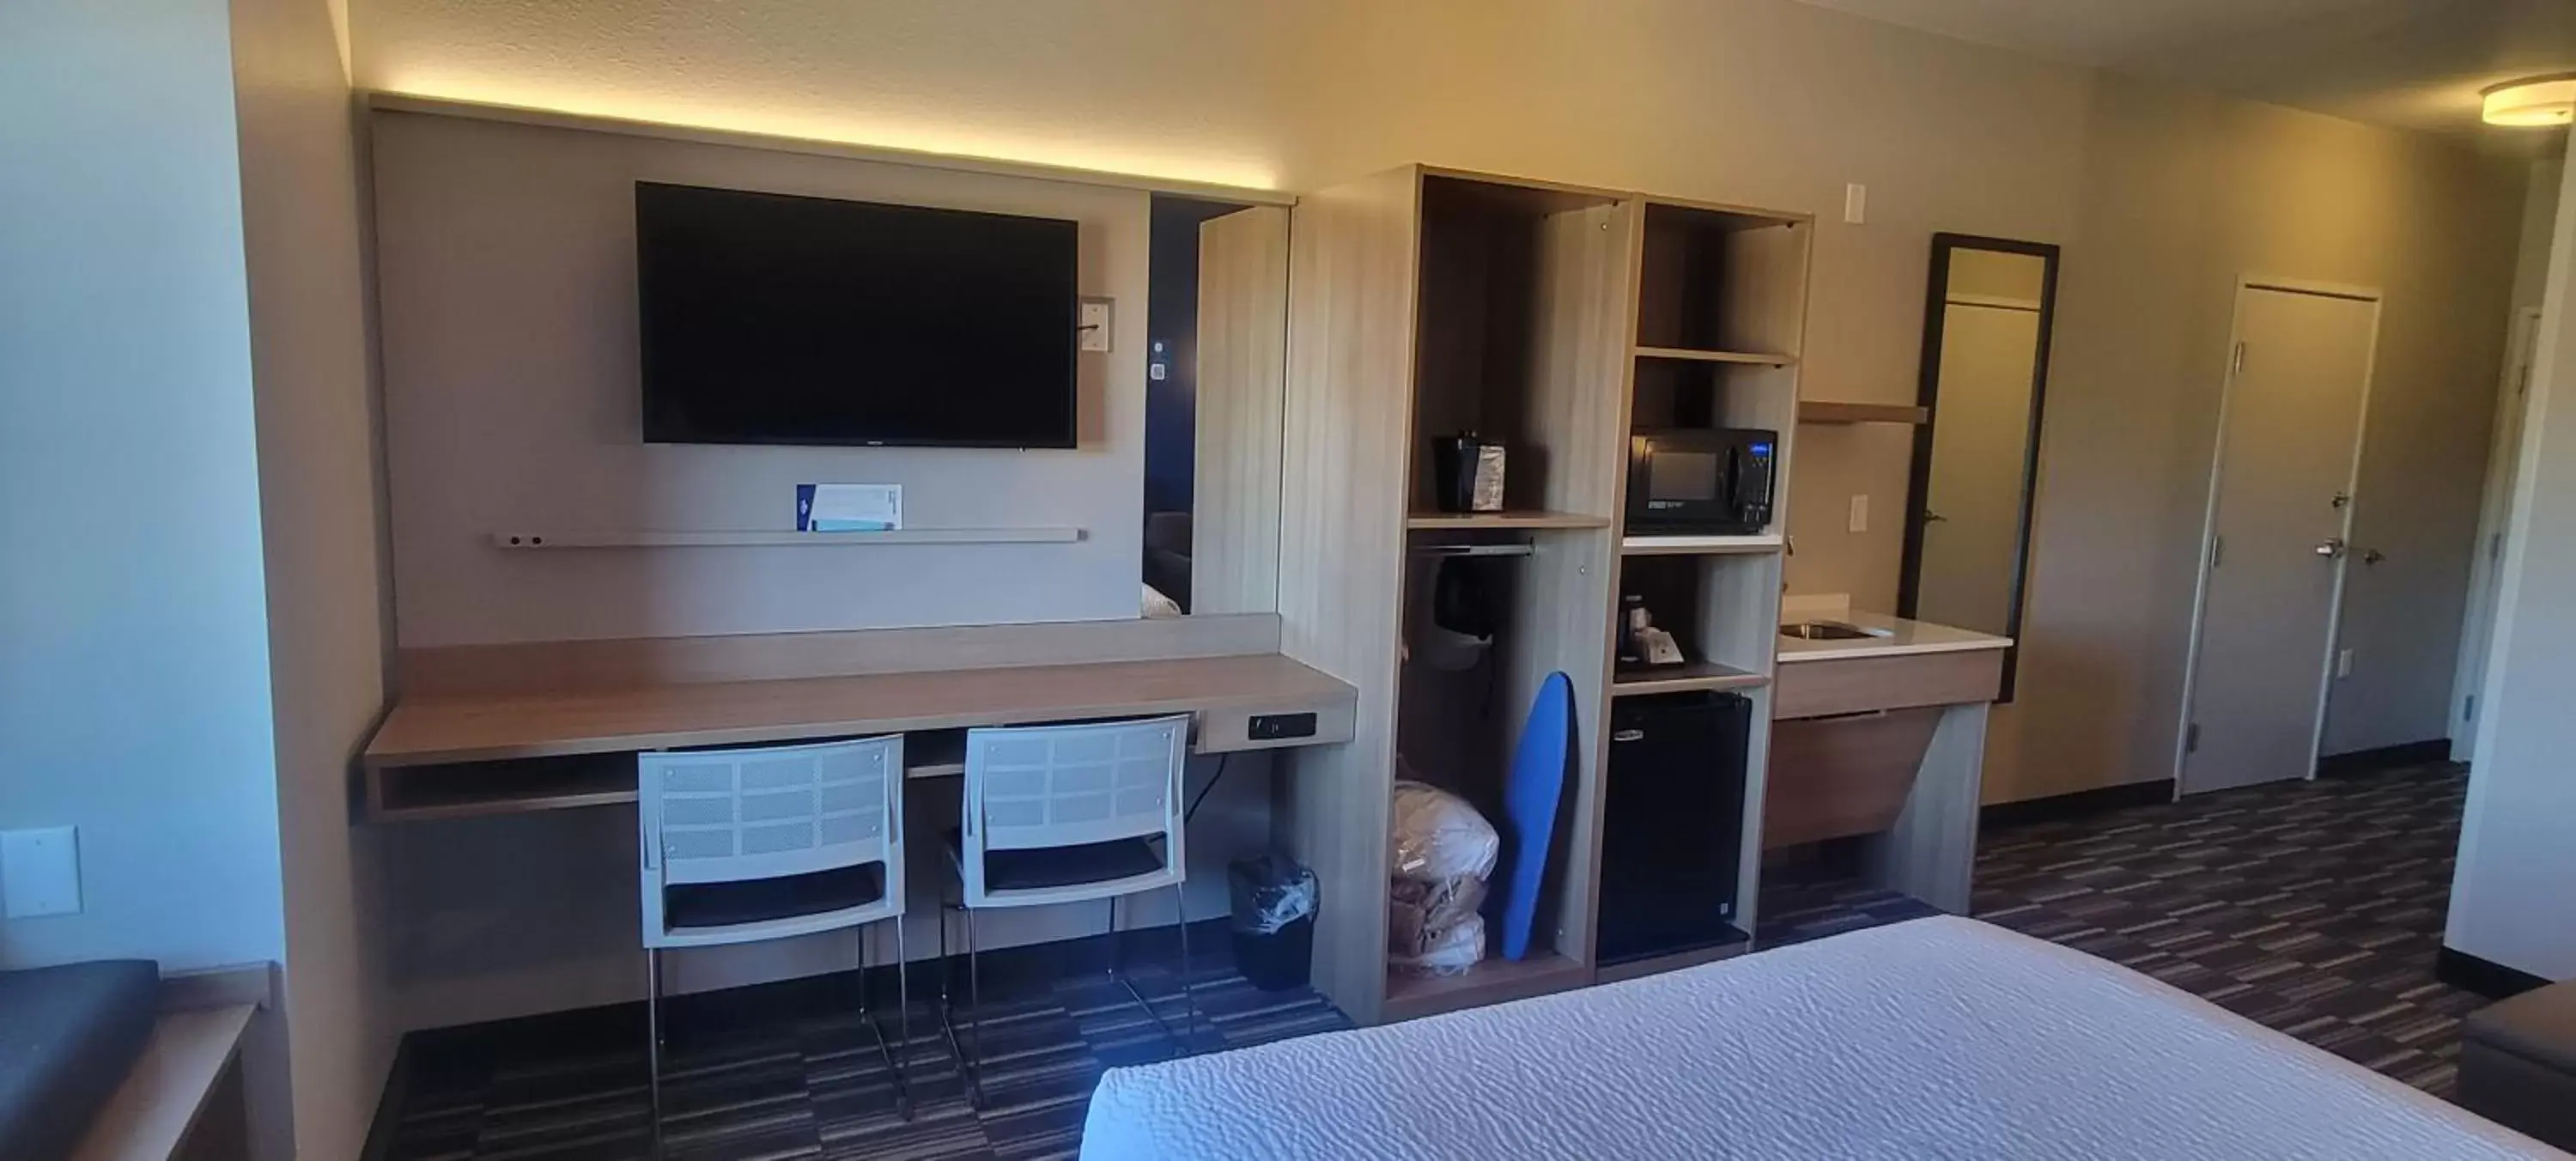 TV and multimedia, TV/Entertainment Center in Microtel Inn & Suites by Wyndham Fountain North